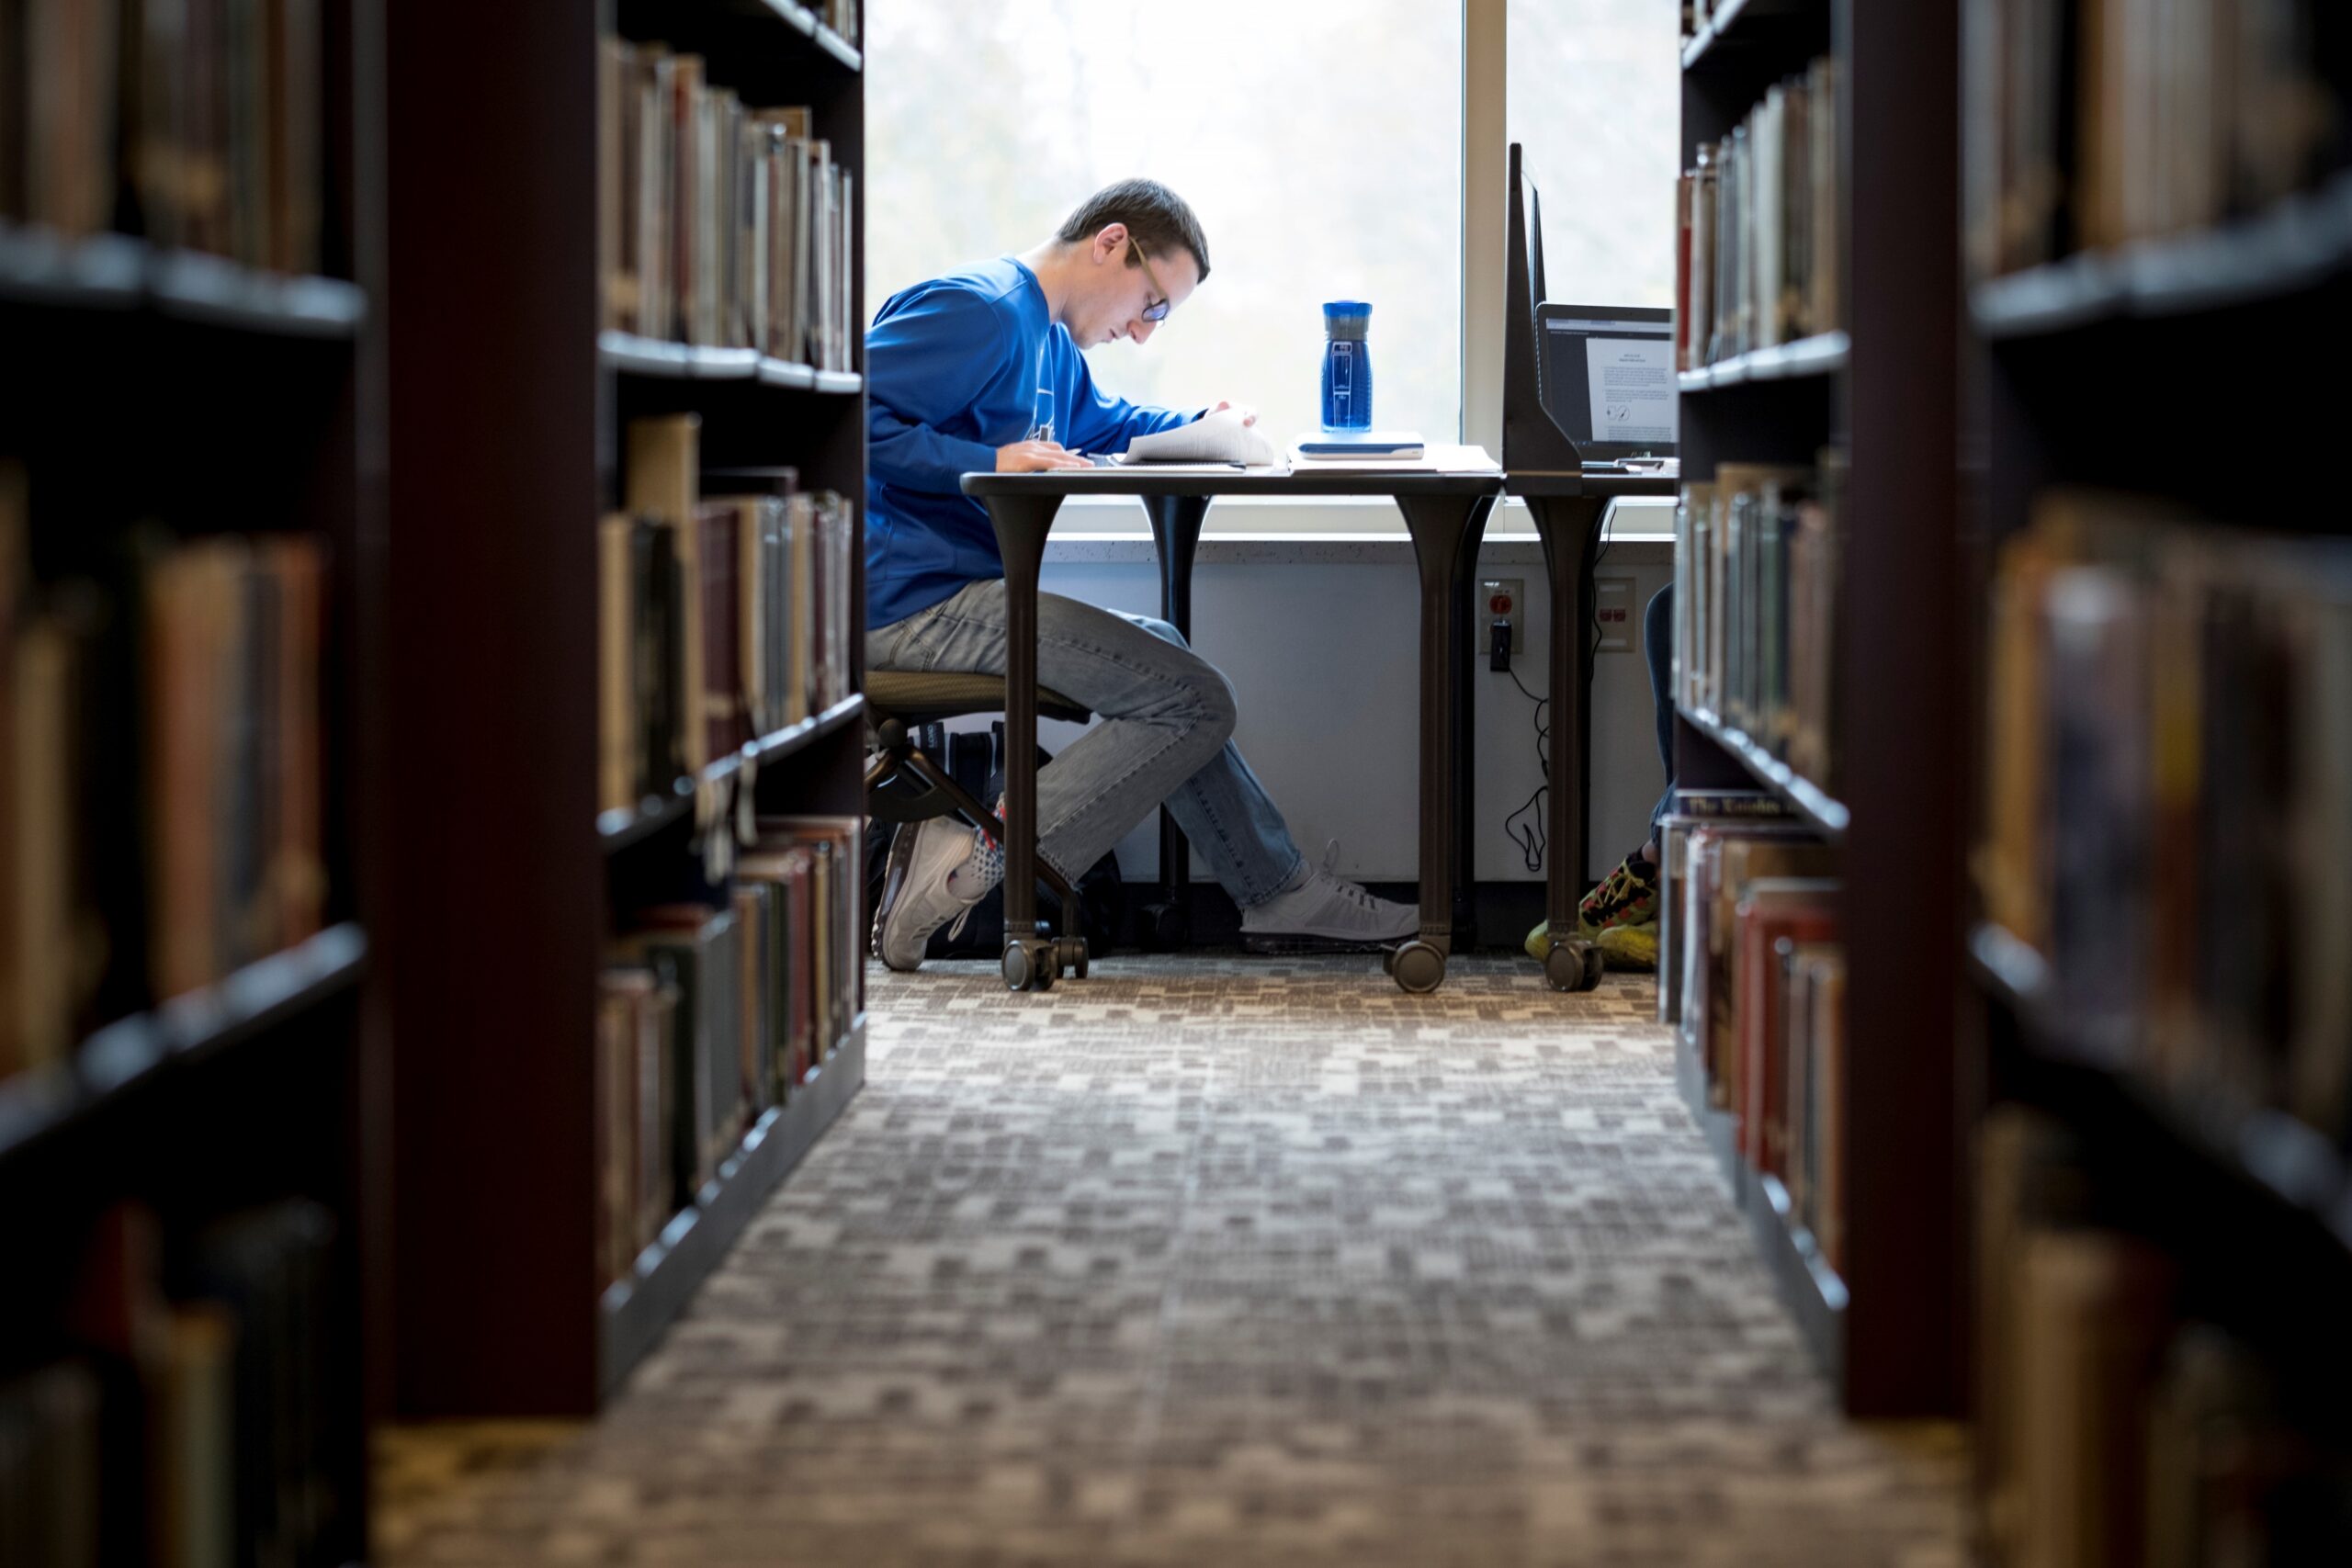 A student studies at St. Norbert College in De Pere.